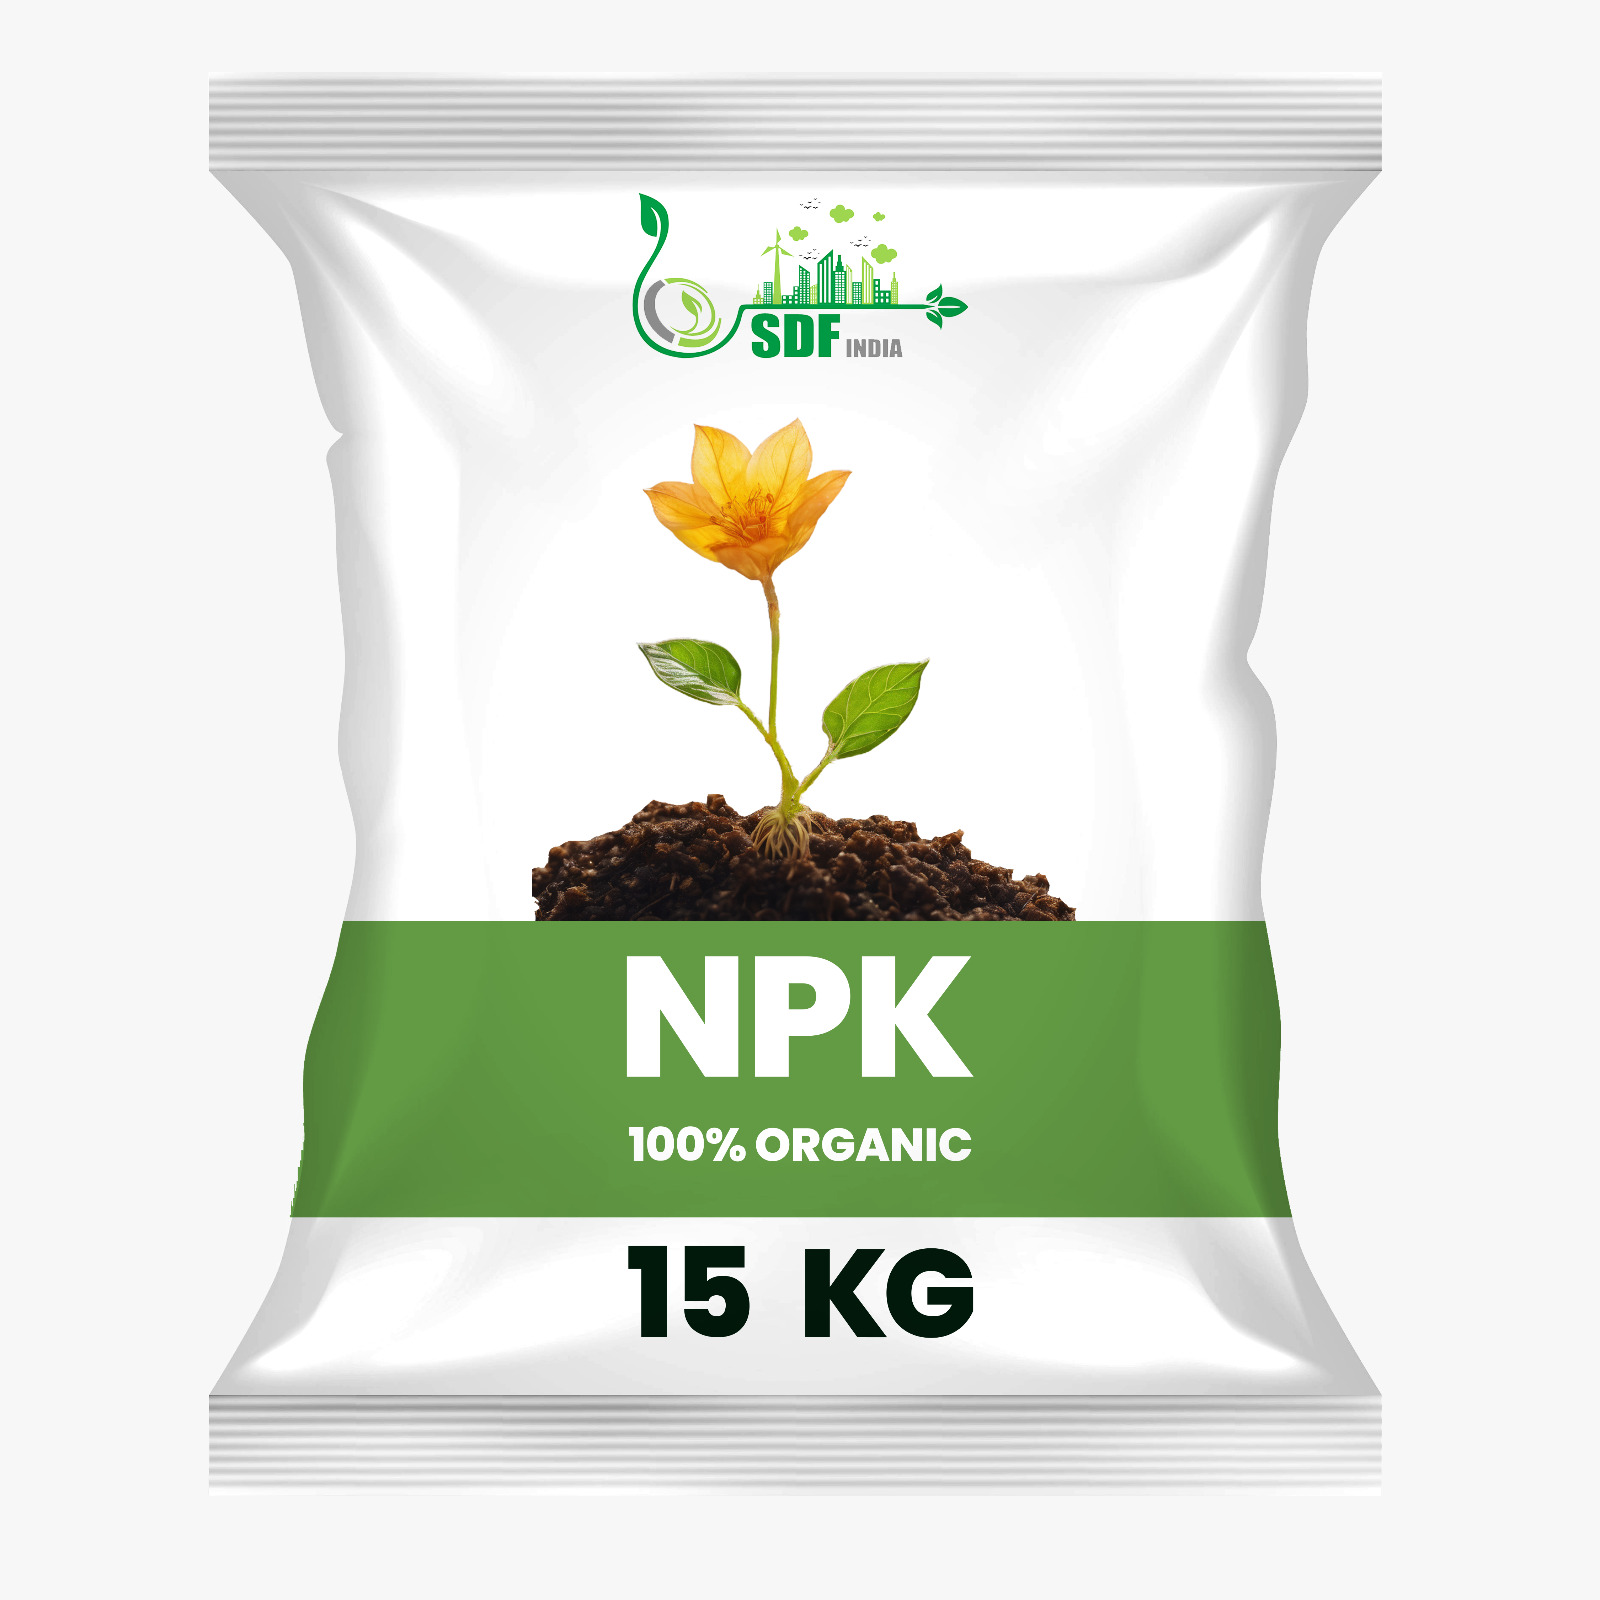  NPK Fertilizer for Plants (15kg) I Complete Plant Food for Gardening, Growth Boost and Flowering